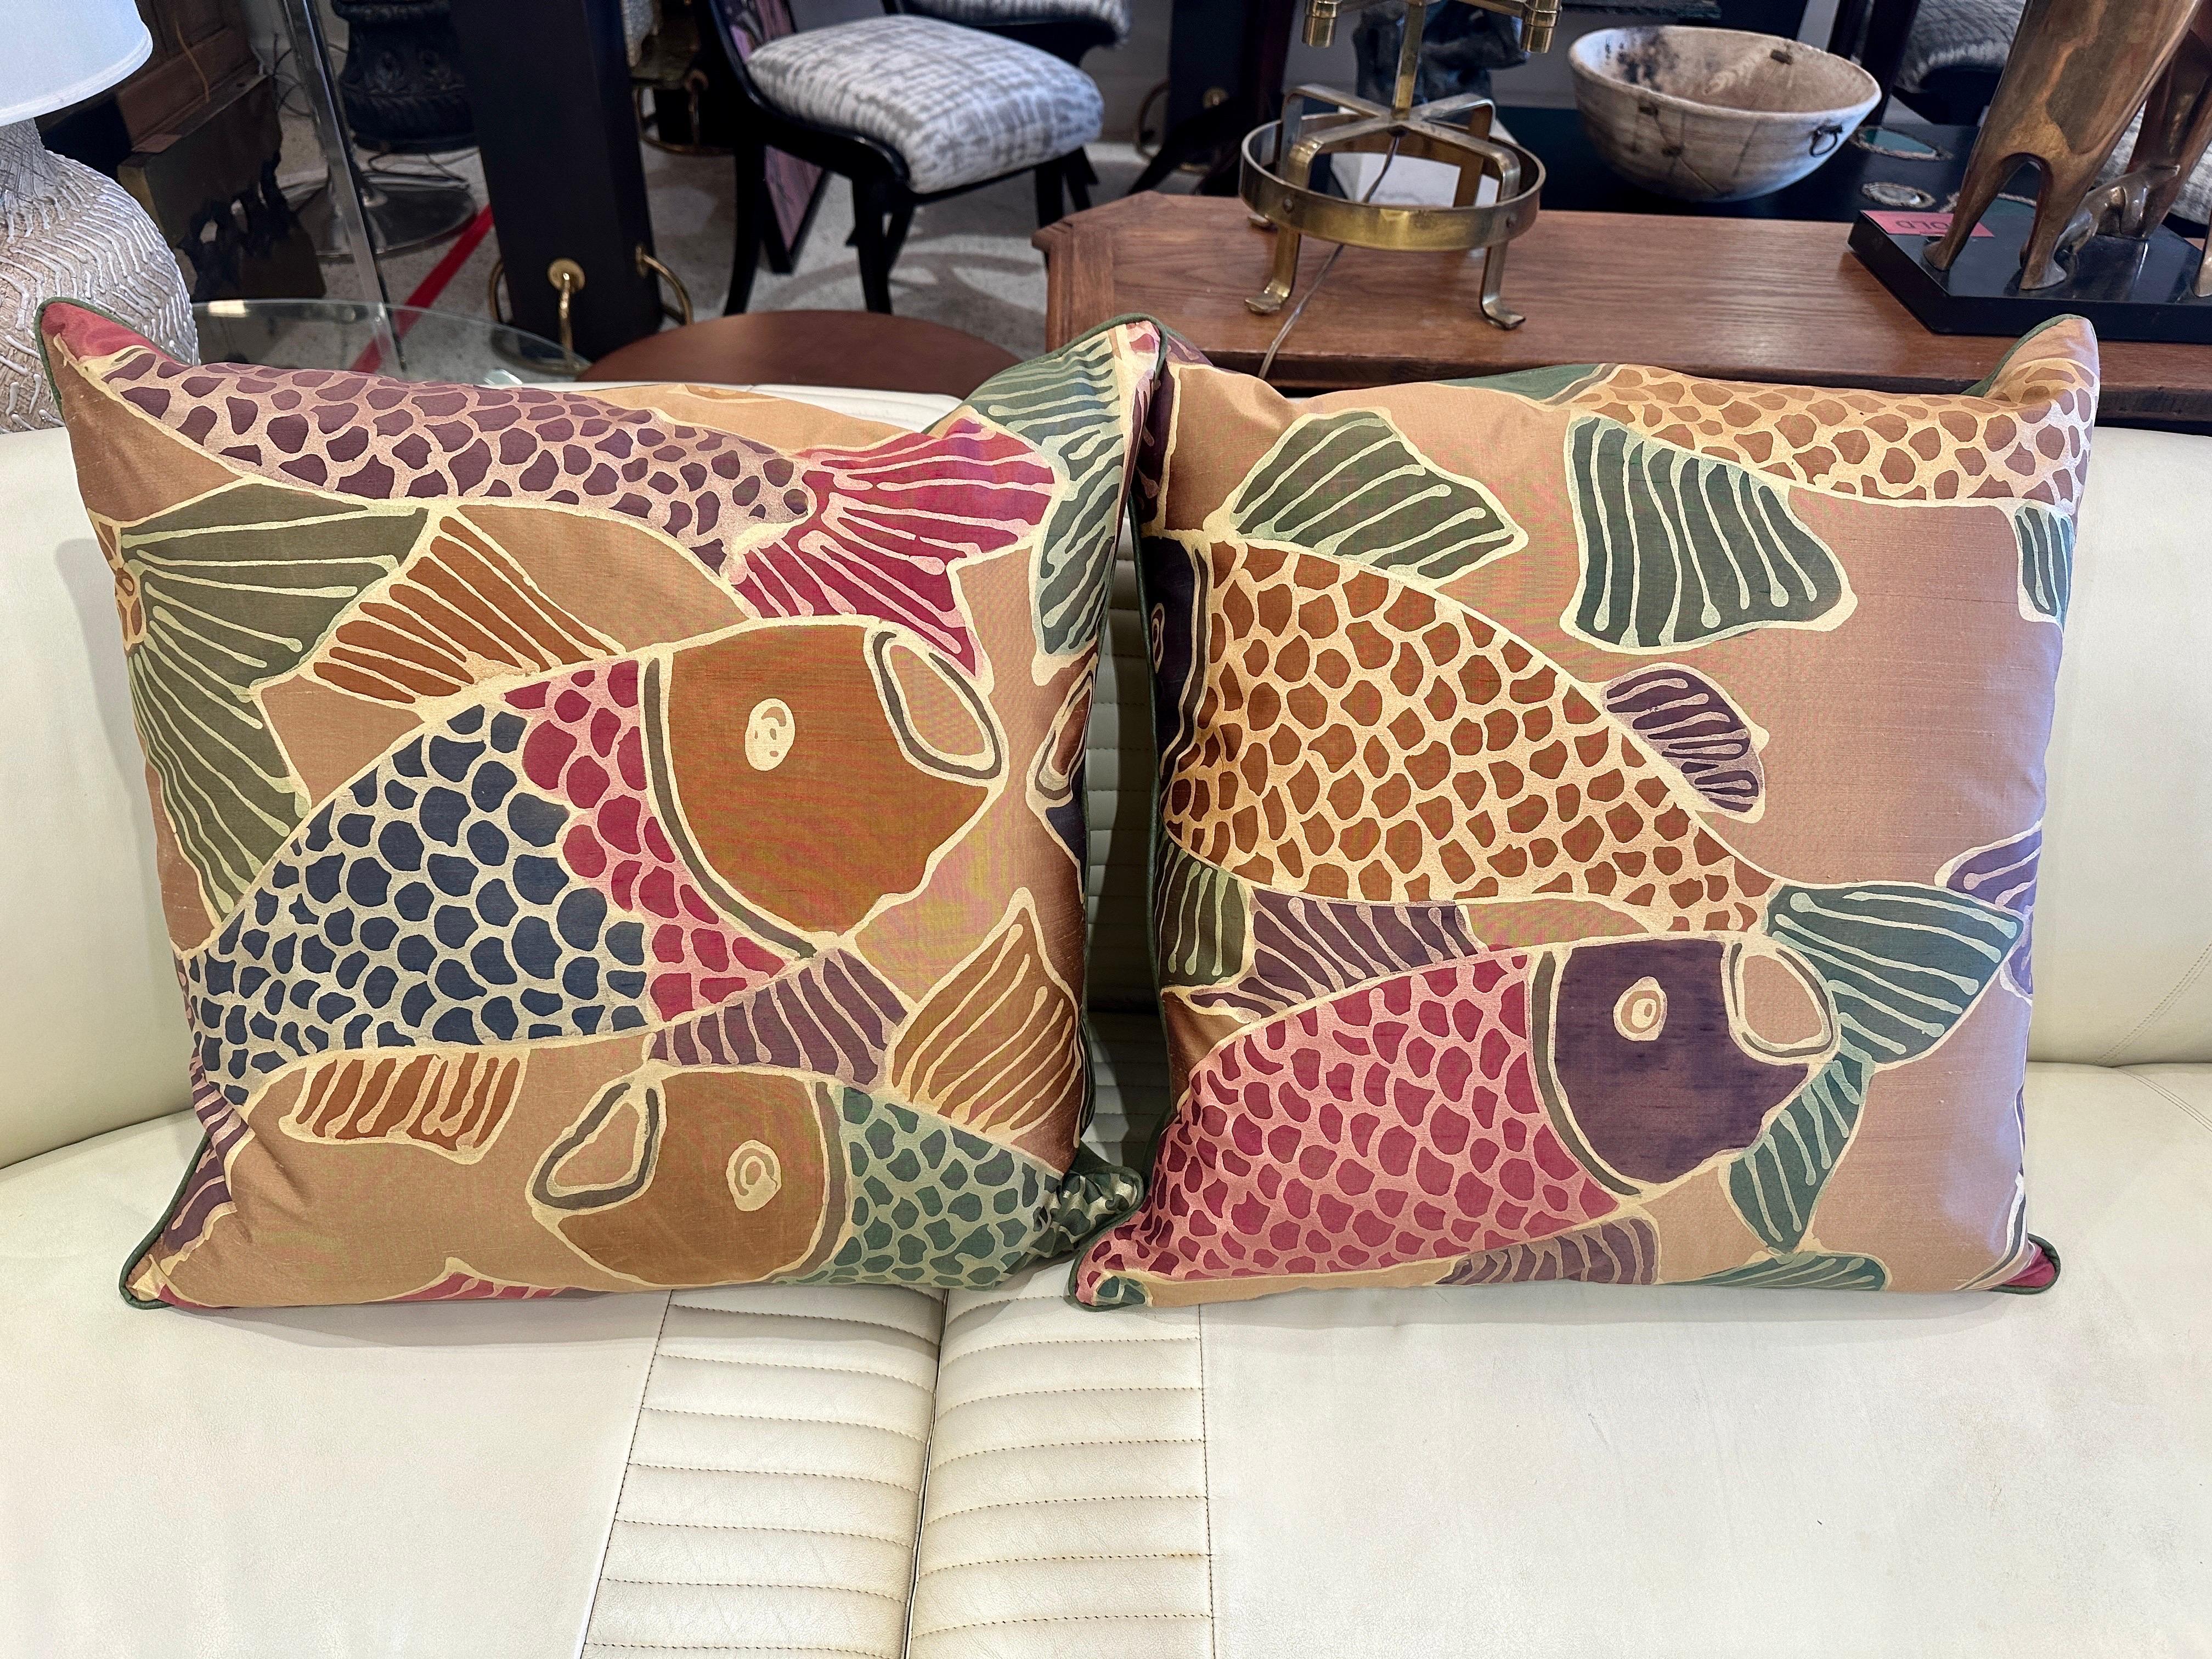 These elegant and luxurious down-mix filled pillows covered in a beautifully vivid KOI pond scene made of silk and a complimentary fabric to verso. ONLY 4 of these beautiful pillows were made custom for Gustavo Olivieri Antiques. See our other